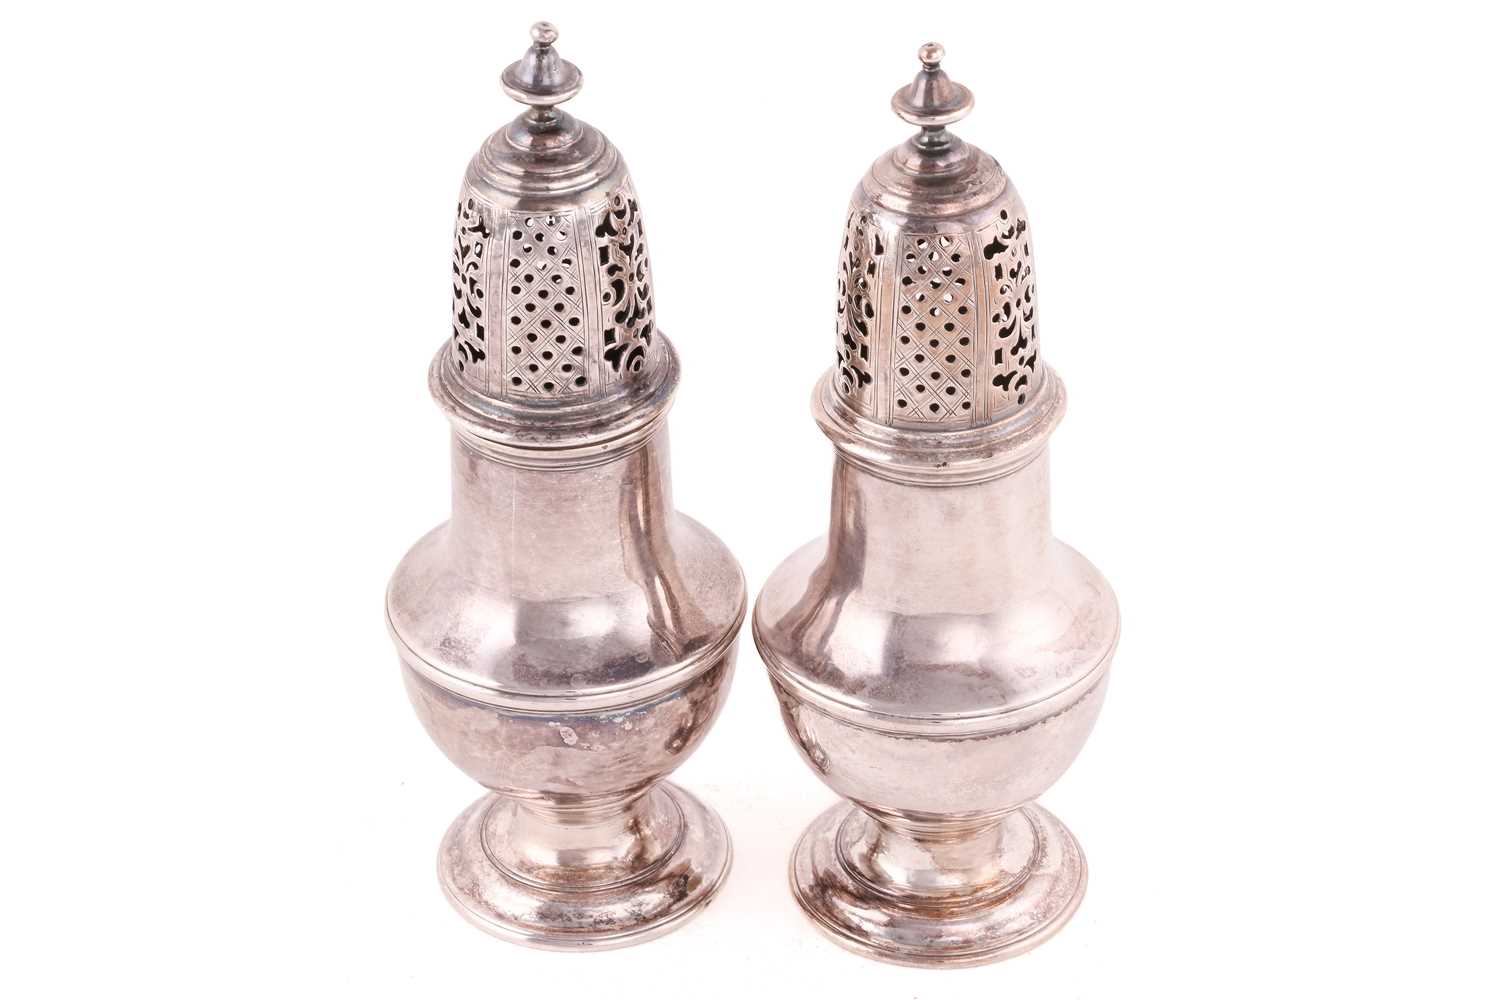 A pair of George III silver sugar casters, London 1779 by Samuel Wood, each of baluster form on